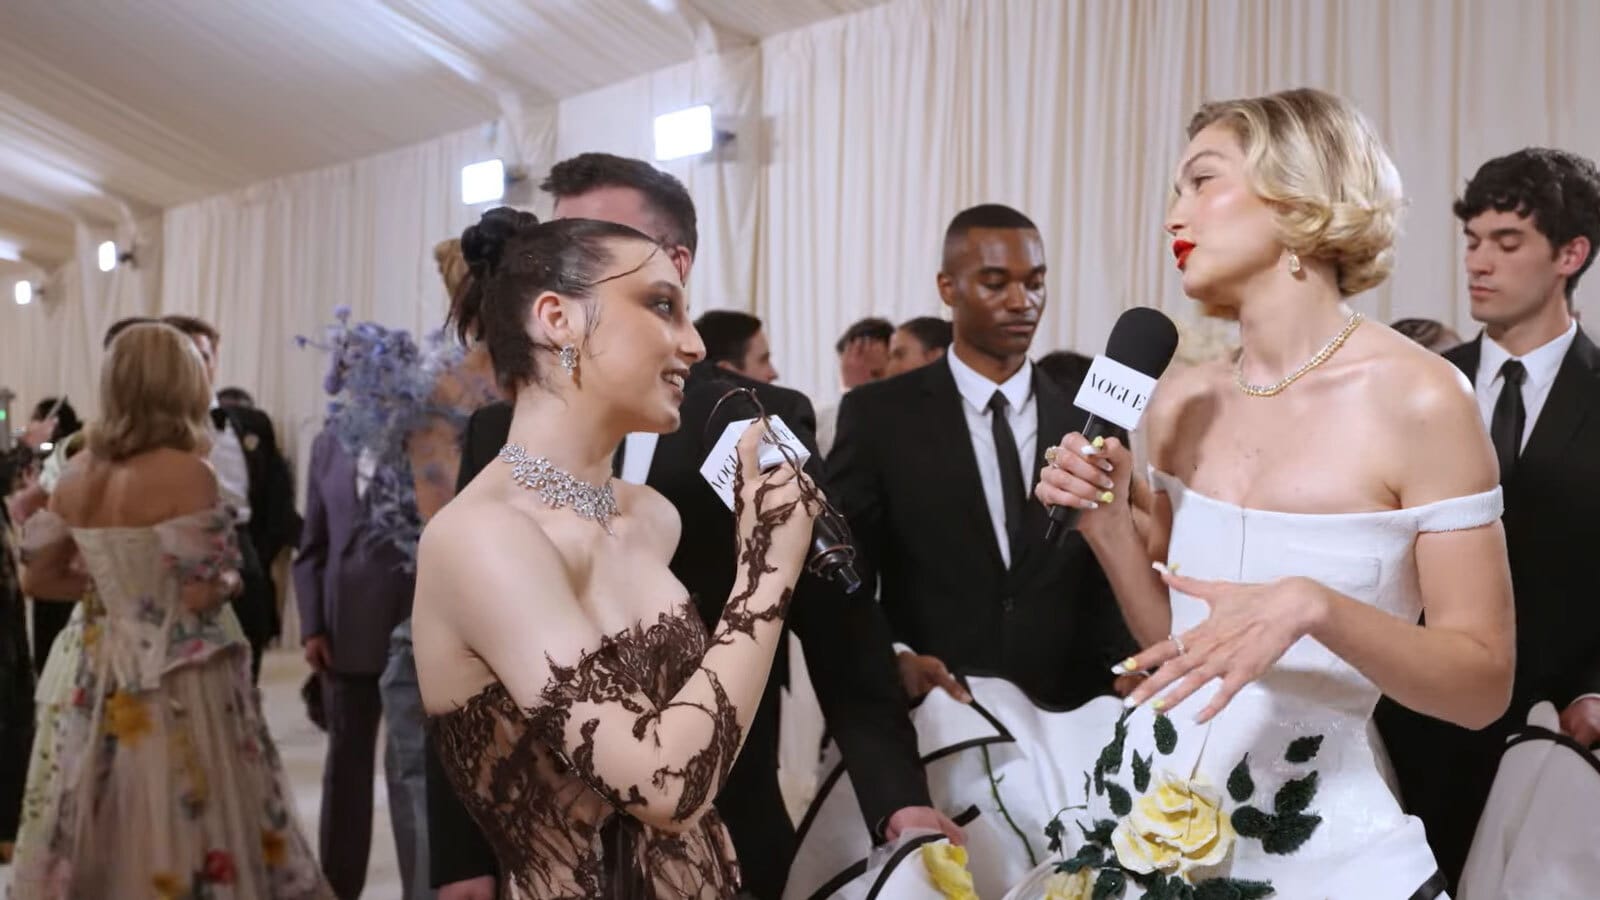 Emma Chamberlain, in a brown lace gown, tilts her head and smiles at Gigi Hadid, in an elaborate white ballgown embroidered with yellow flowers and green foliage; both are holding microphones